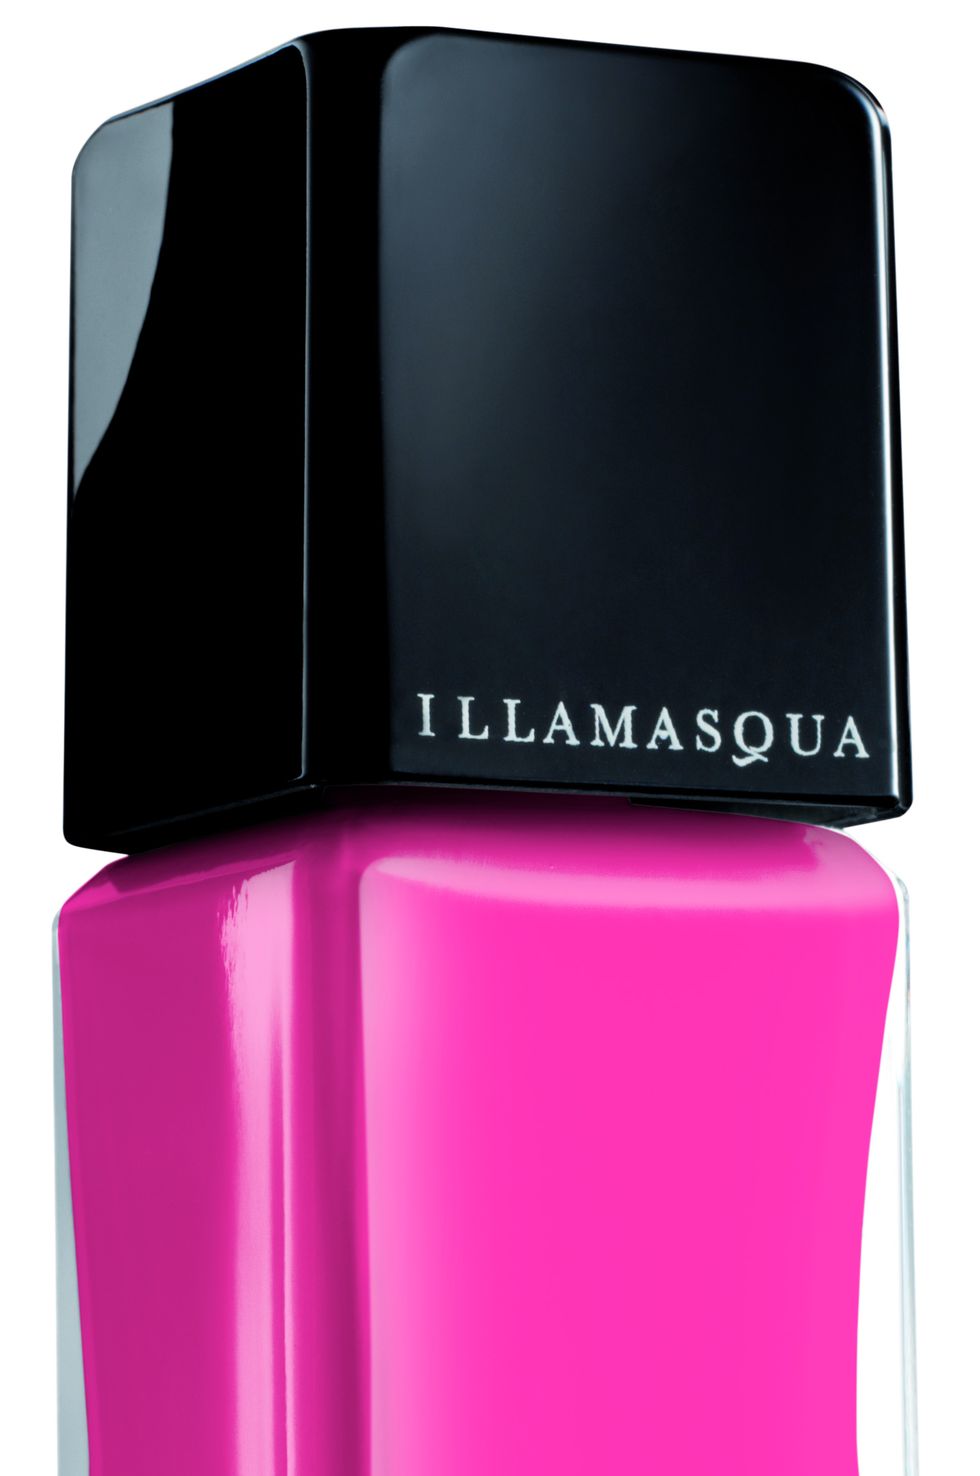 <p>Work a nuance of neon that won't overwhelm your look; this punchy pink polish is happy, bright, and totally foolproof. It's vibrant on its own but you can give it a little boost, applying a white base coat underneath to help those pigments pop.</p>
<p><a href="http://www.illamasqua.com/shop/collide-nail-varnish" target="_blank">Illamasqua Nail Varnish in Collide, £14.50</a></p>
<p><a href="http://www.cosmopolitan.co.uk/beauty-hair/news/trends/nail-trends-spring-summer-2014" target="_blank">THE BIG 2014 NAIL TRENDS</a></p>
<p><a href="http://www.cosmopolitan.co.uk/beauty-hair/news/trends/celebrity-beauty/celebrity-nail-art-manicures" target="_blank">CELEBRITY NAIL ART TRENDS</a></p>
<p><a href="http://www.cosmopolitan.co.uk/beauty-hair/news/trends/makeup-trends-spring-summer-2014" target="_blank">9 BIG BEAUTY TRENDS FOR SS14</a></p>